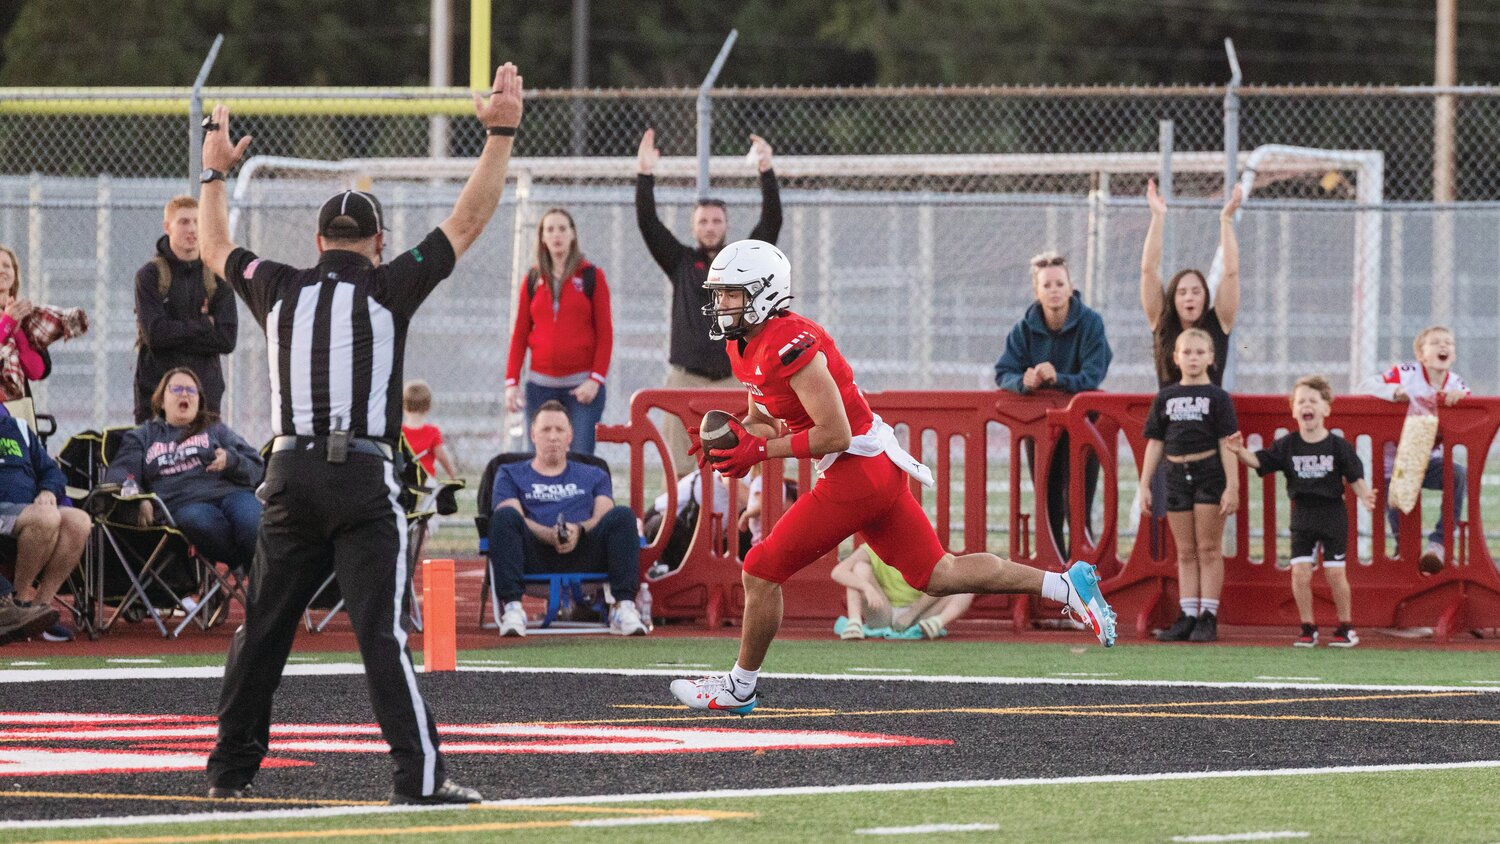 Jared Wenzelburger / For the Nisqually Valley News
Yelm wide receiver Marius Aalona scores a touchdown against the Union Titans on Sept. 8. The Tornados won 62-34.